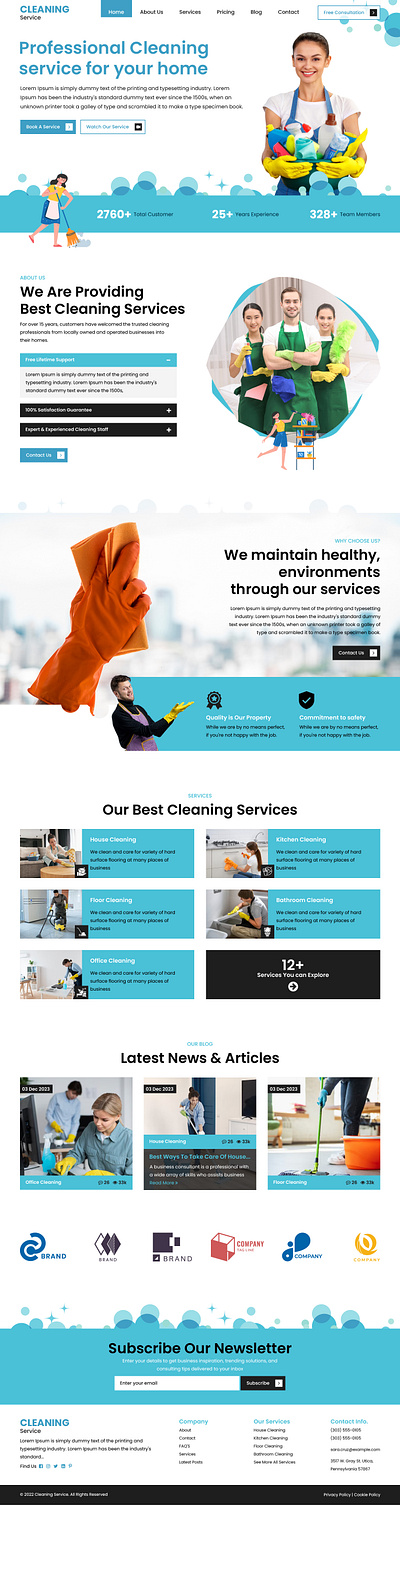 Cleaning Service Landing Page UI cleaning service page ui cleaning services webpage design landing page landing page ui service page ui design ui ui design